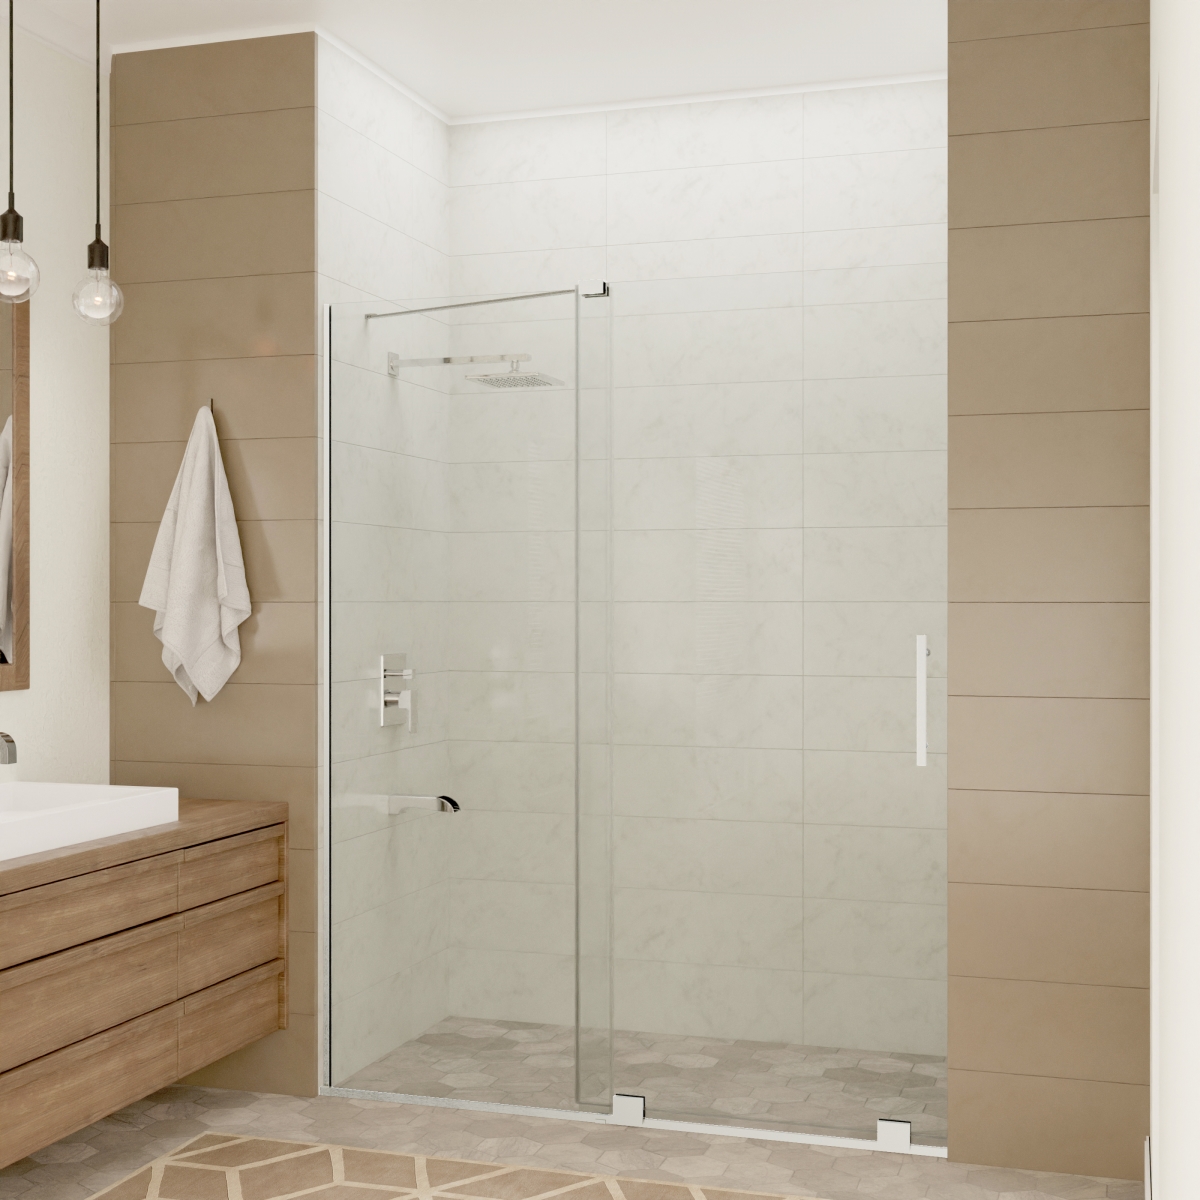 Picture of Anzzi SD-AZ055-01BN 60 x 76 in. Longboat Series Semi-Frameless Shower Door with Tsunami Guard, Brushed Nickel